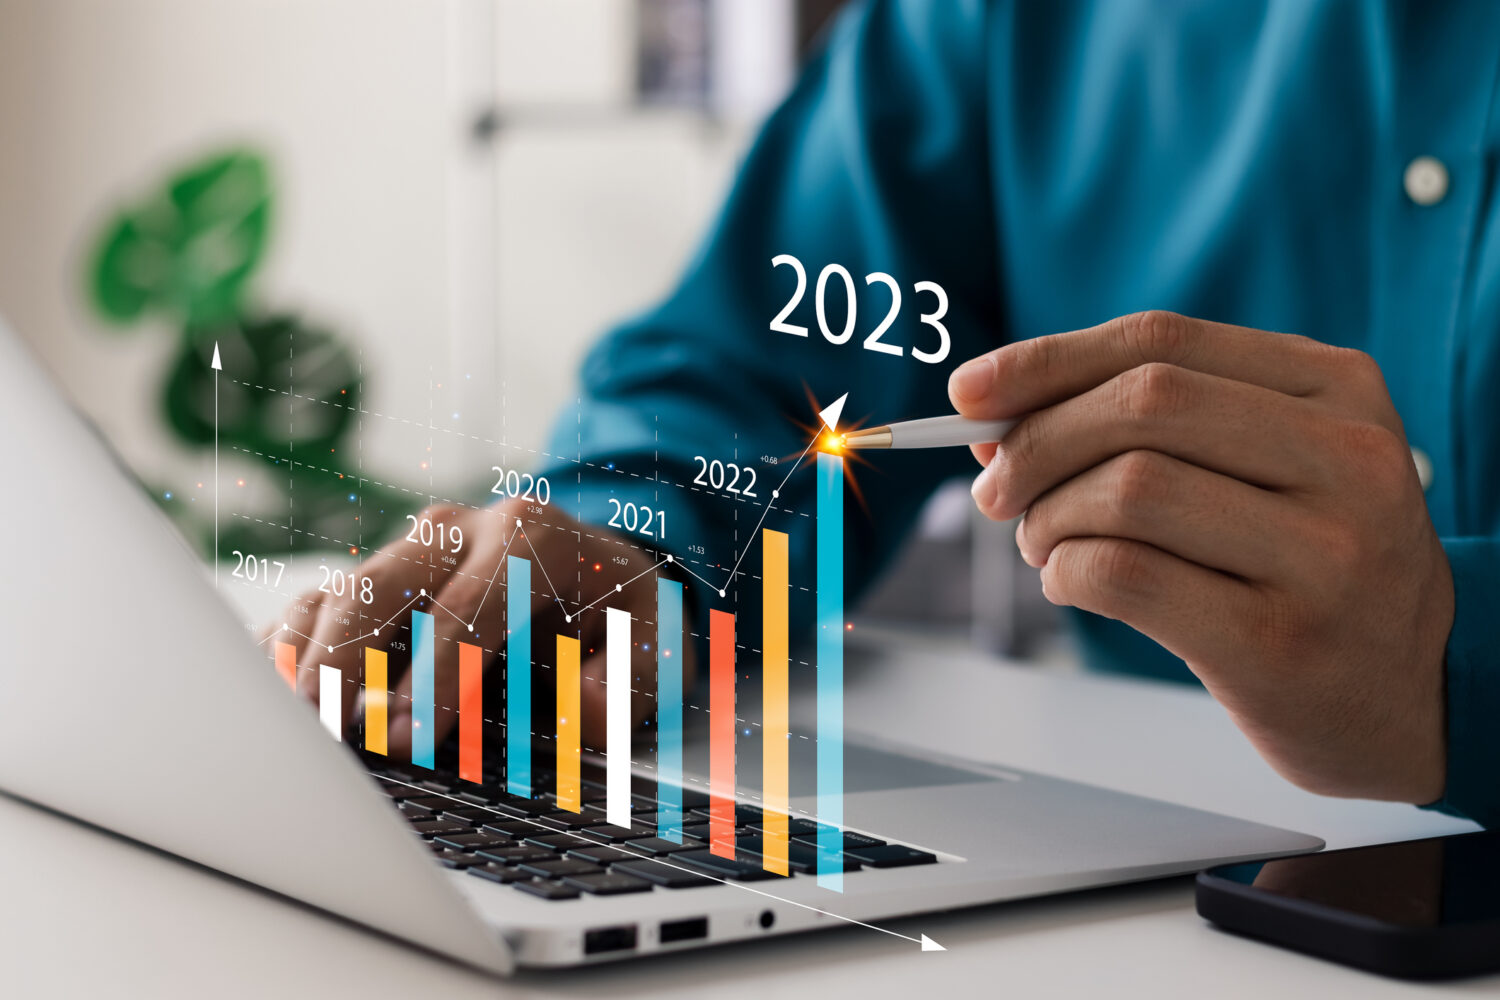 Video Marketing Stats and Trends in 2023